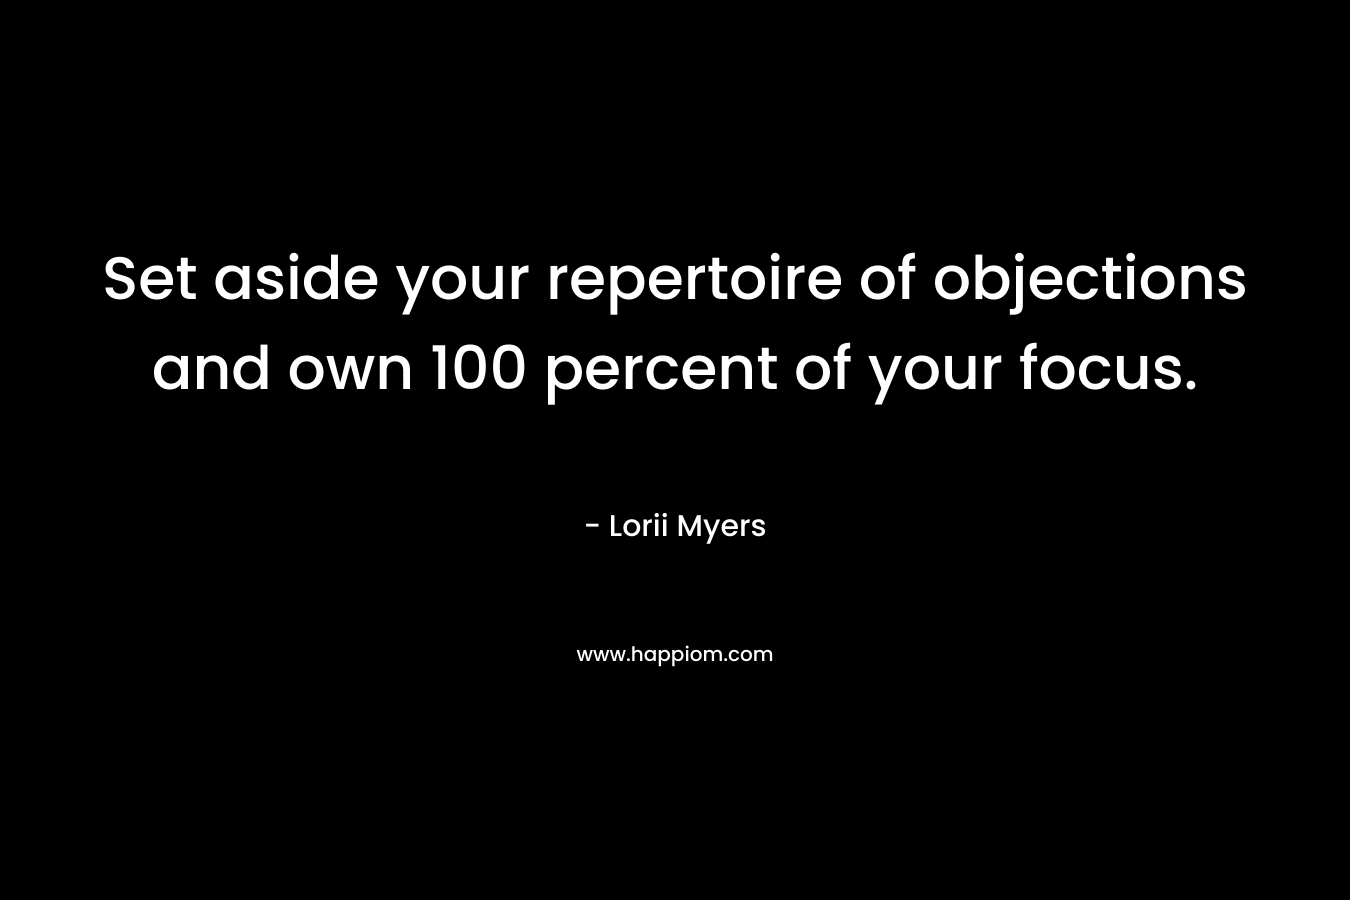 Set aside your repertoire of objections and own 100 percent of your focus.